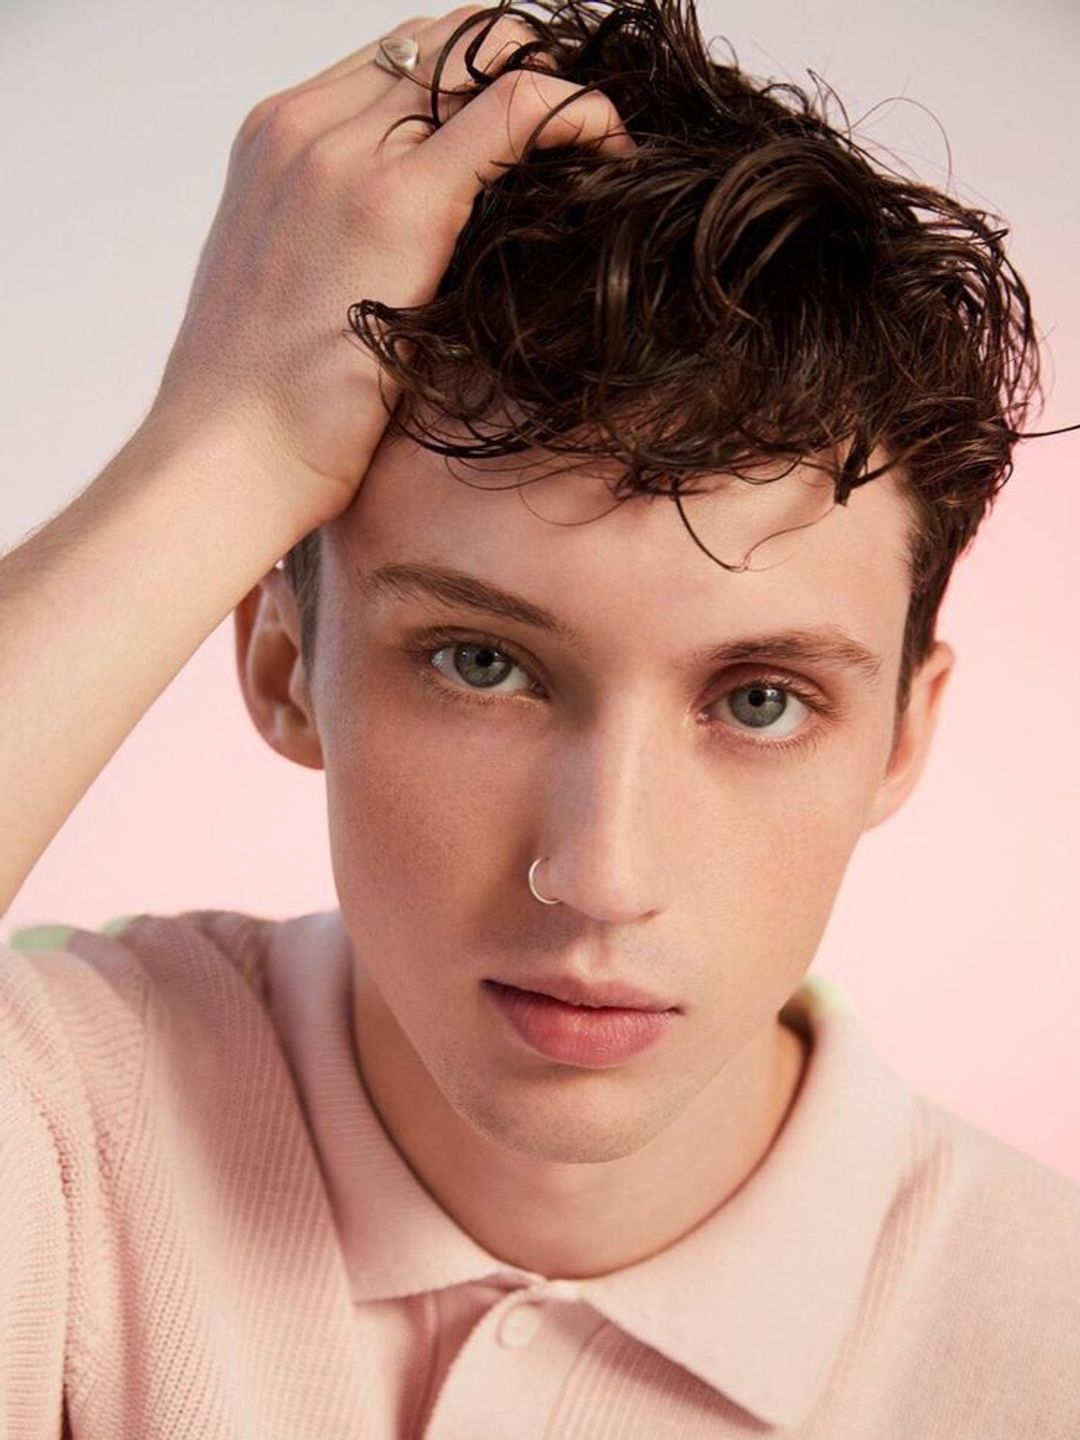 Troye Sivan does he have a wife